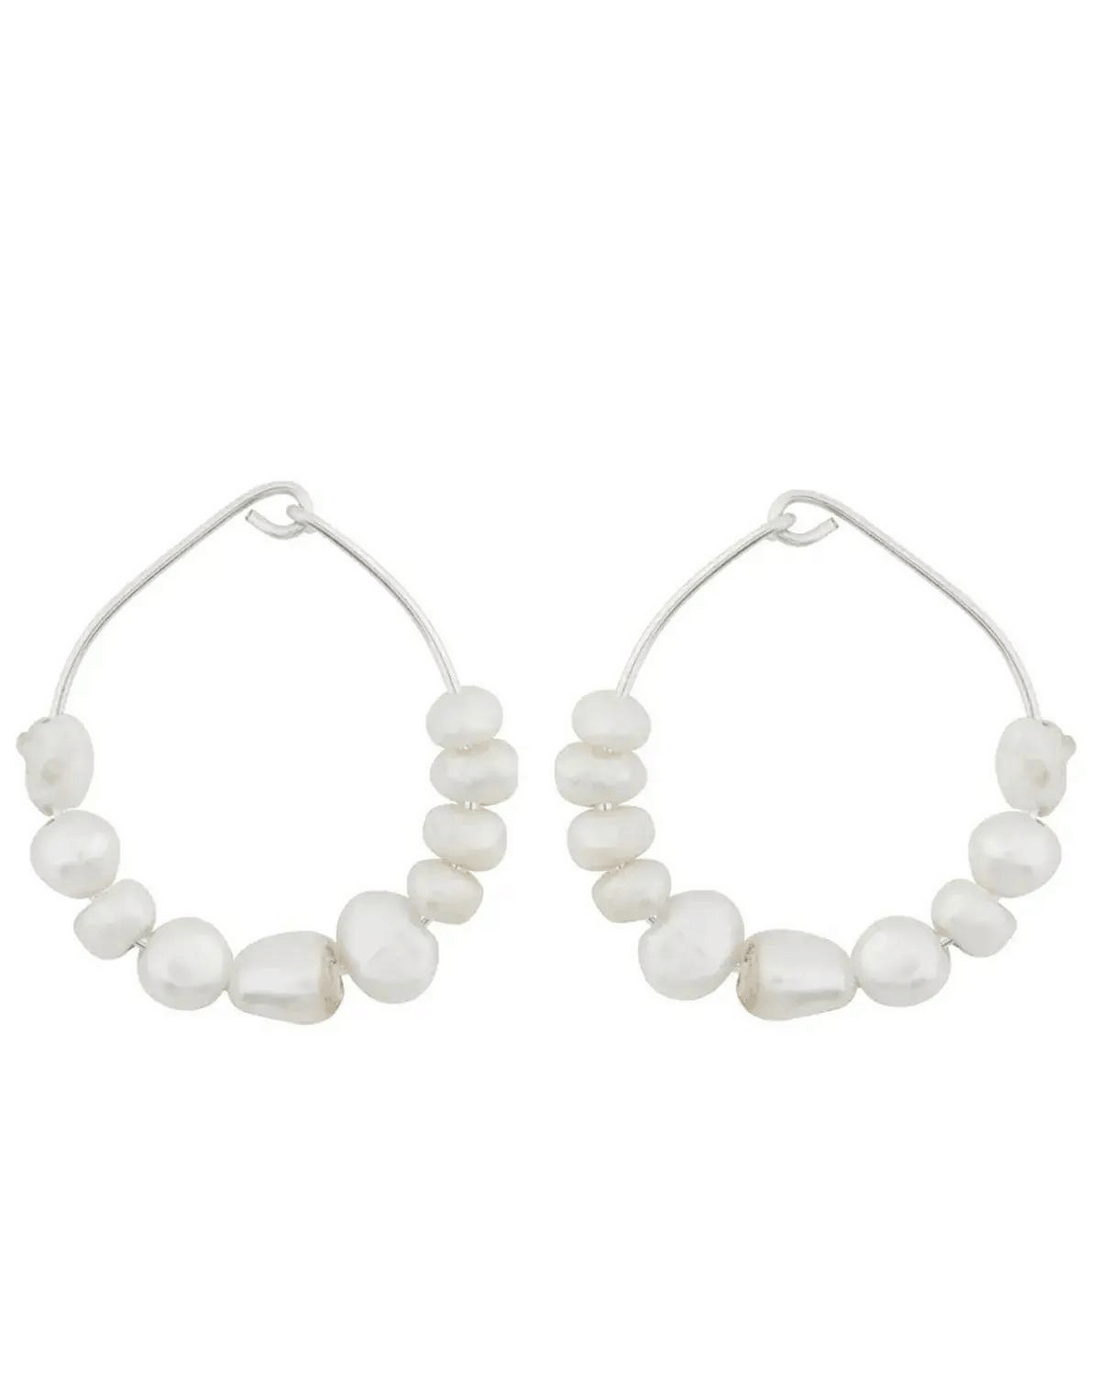 The Venus Pearl Hoops by Made by a. in Silver